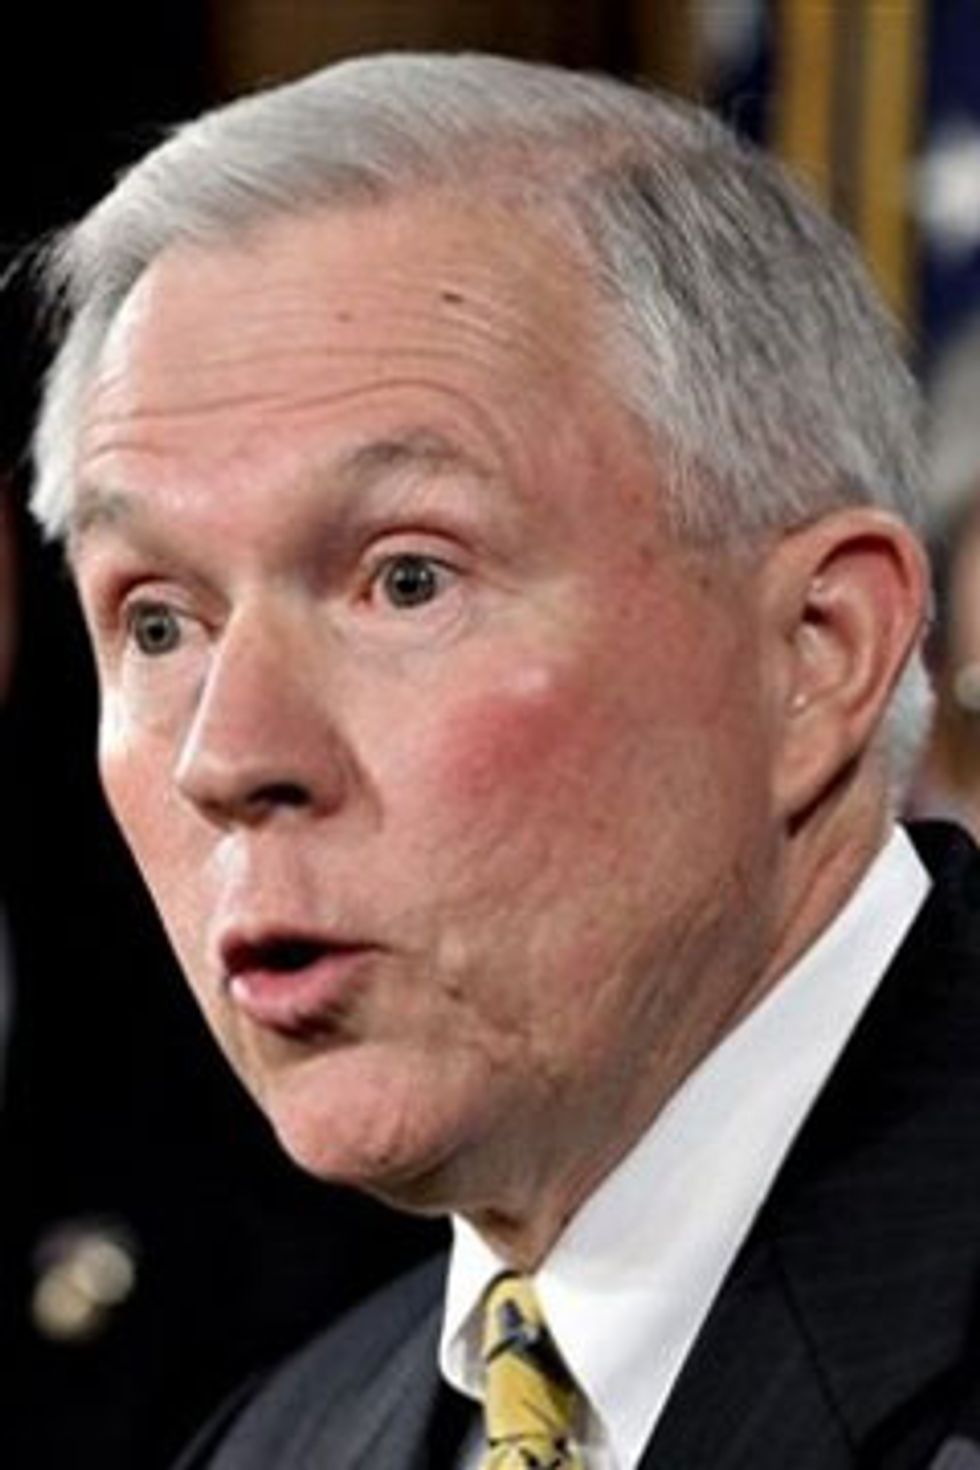 Vile Racist Jeff Sessions: It's His Day To Shine!